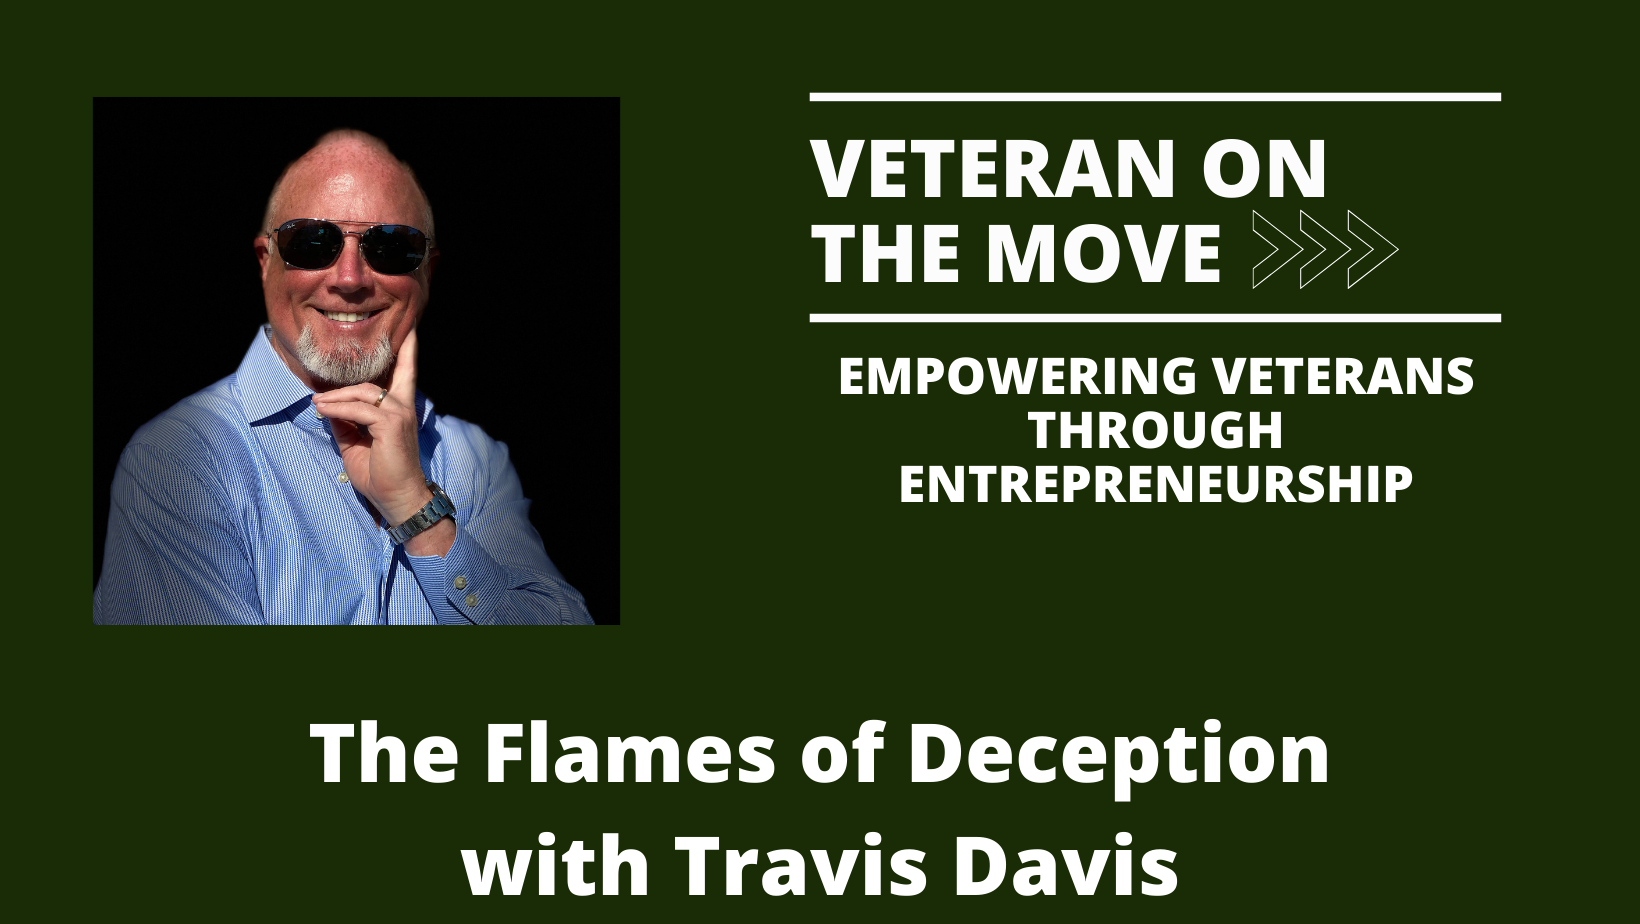 The Flames of Deception with Travis Davis